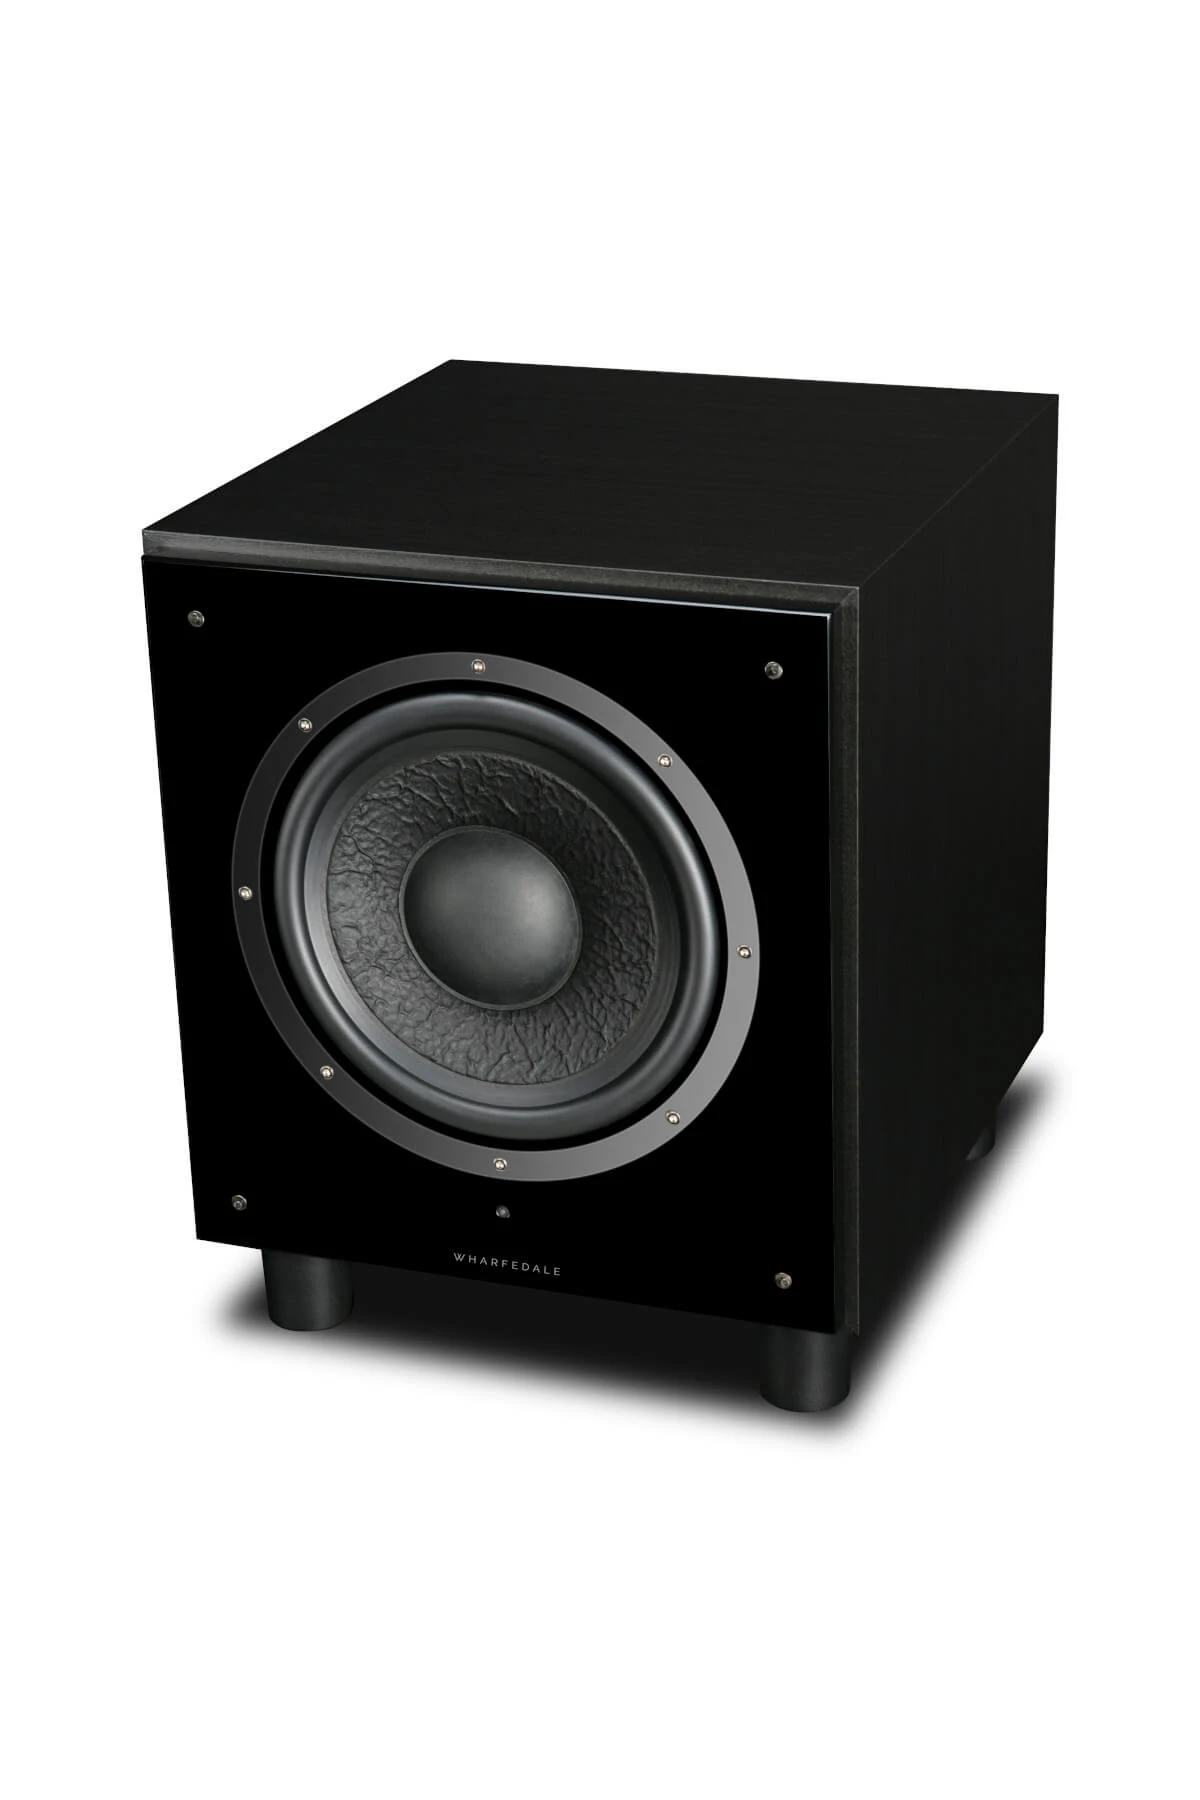 Wharfedale-SW-10-blackwood-side-front